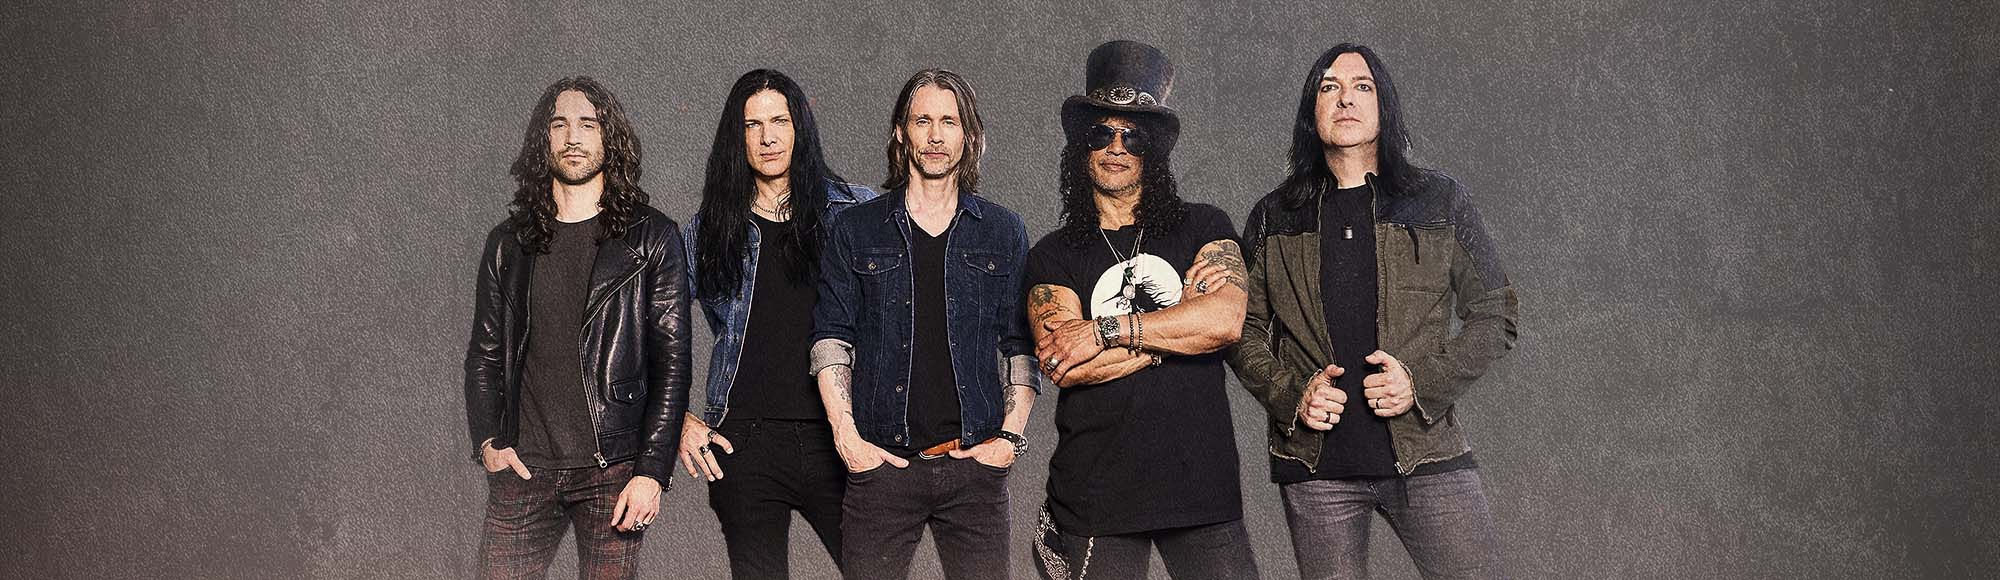 Slash featuring Myles Kennedy and The  Conspirators show